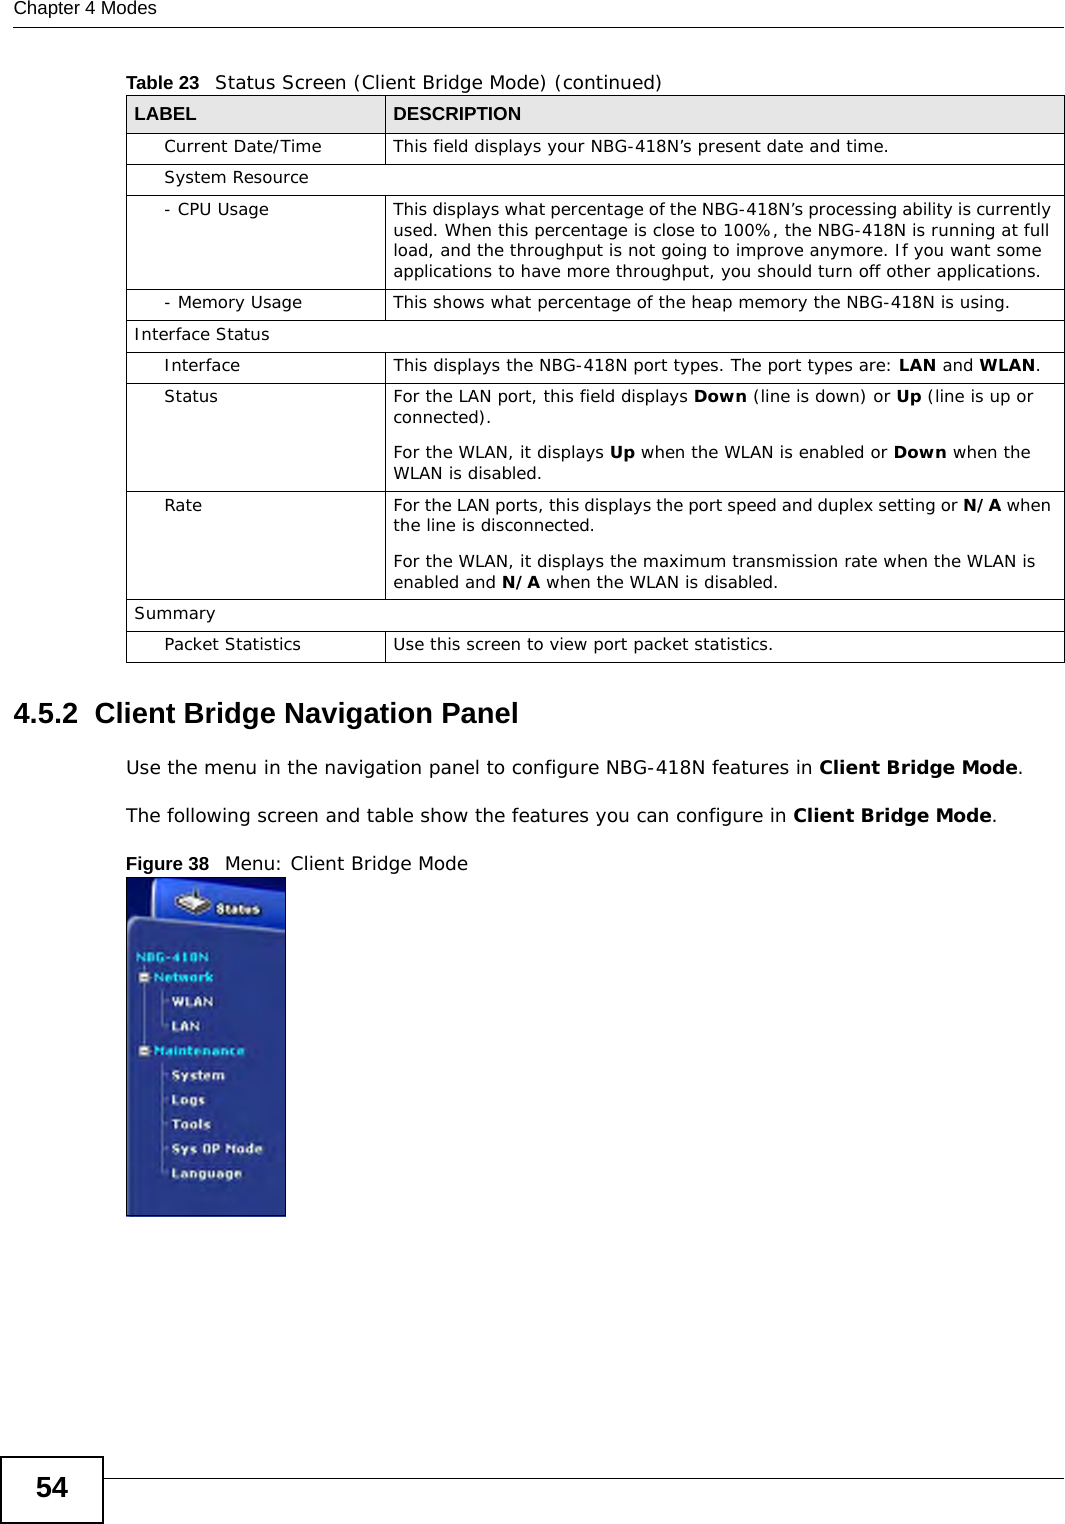 Chapter 4 Modes544.5.2  Client Bridge Navigation PanelUse the menu in the navigation panel to configure NBG-418N features in Client Bridge Mode.The following screen and table show the features you can configure in Client Bridge Mode.Figure 38   Menu: Client Bridge ModeCurrent Date/Time This field displays your NBG-418N’s present date and time.System Resource- CPU Usage This displays what percentage of the NBG-418N’s processing ability is currently used. When this percentage is close to 100%, the NBG-418N is running at full load, and the throughput is not going to improve anymore. If you want some applications to have more throughput, you should turn off other applications.- Memory Usage This shows what percentage of the heap memory the NBG-418N is using. Interface StatusInterface This displays the NBG-418N port types. The port types are: LAN and WLAN.Status For the LAN port, this field displays Down (line is down) or Up (line is up or connected).For the WLAN, it displays Up when the WLAN is enabled or Down when the WLAN is disabled.Rate For the LAN ports, this displays the port speed and duplex setting or N/A when the line is disconnected.For the WLAN, it displays the maximum transmission rate when the WLAN is enabled and N/A when the WLAN is disabled.SummaryPacket Statistics Use this screen to view port packet statistics.Table 23   Status Screen (Client Bridge Mode) (continued)LABEL DESCRIPTION